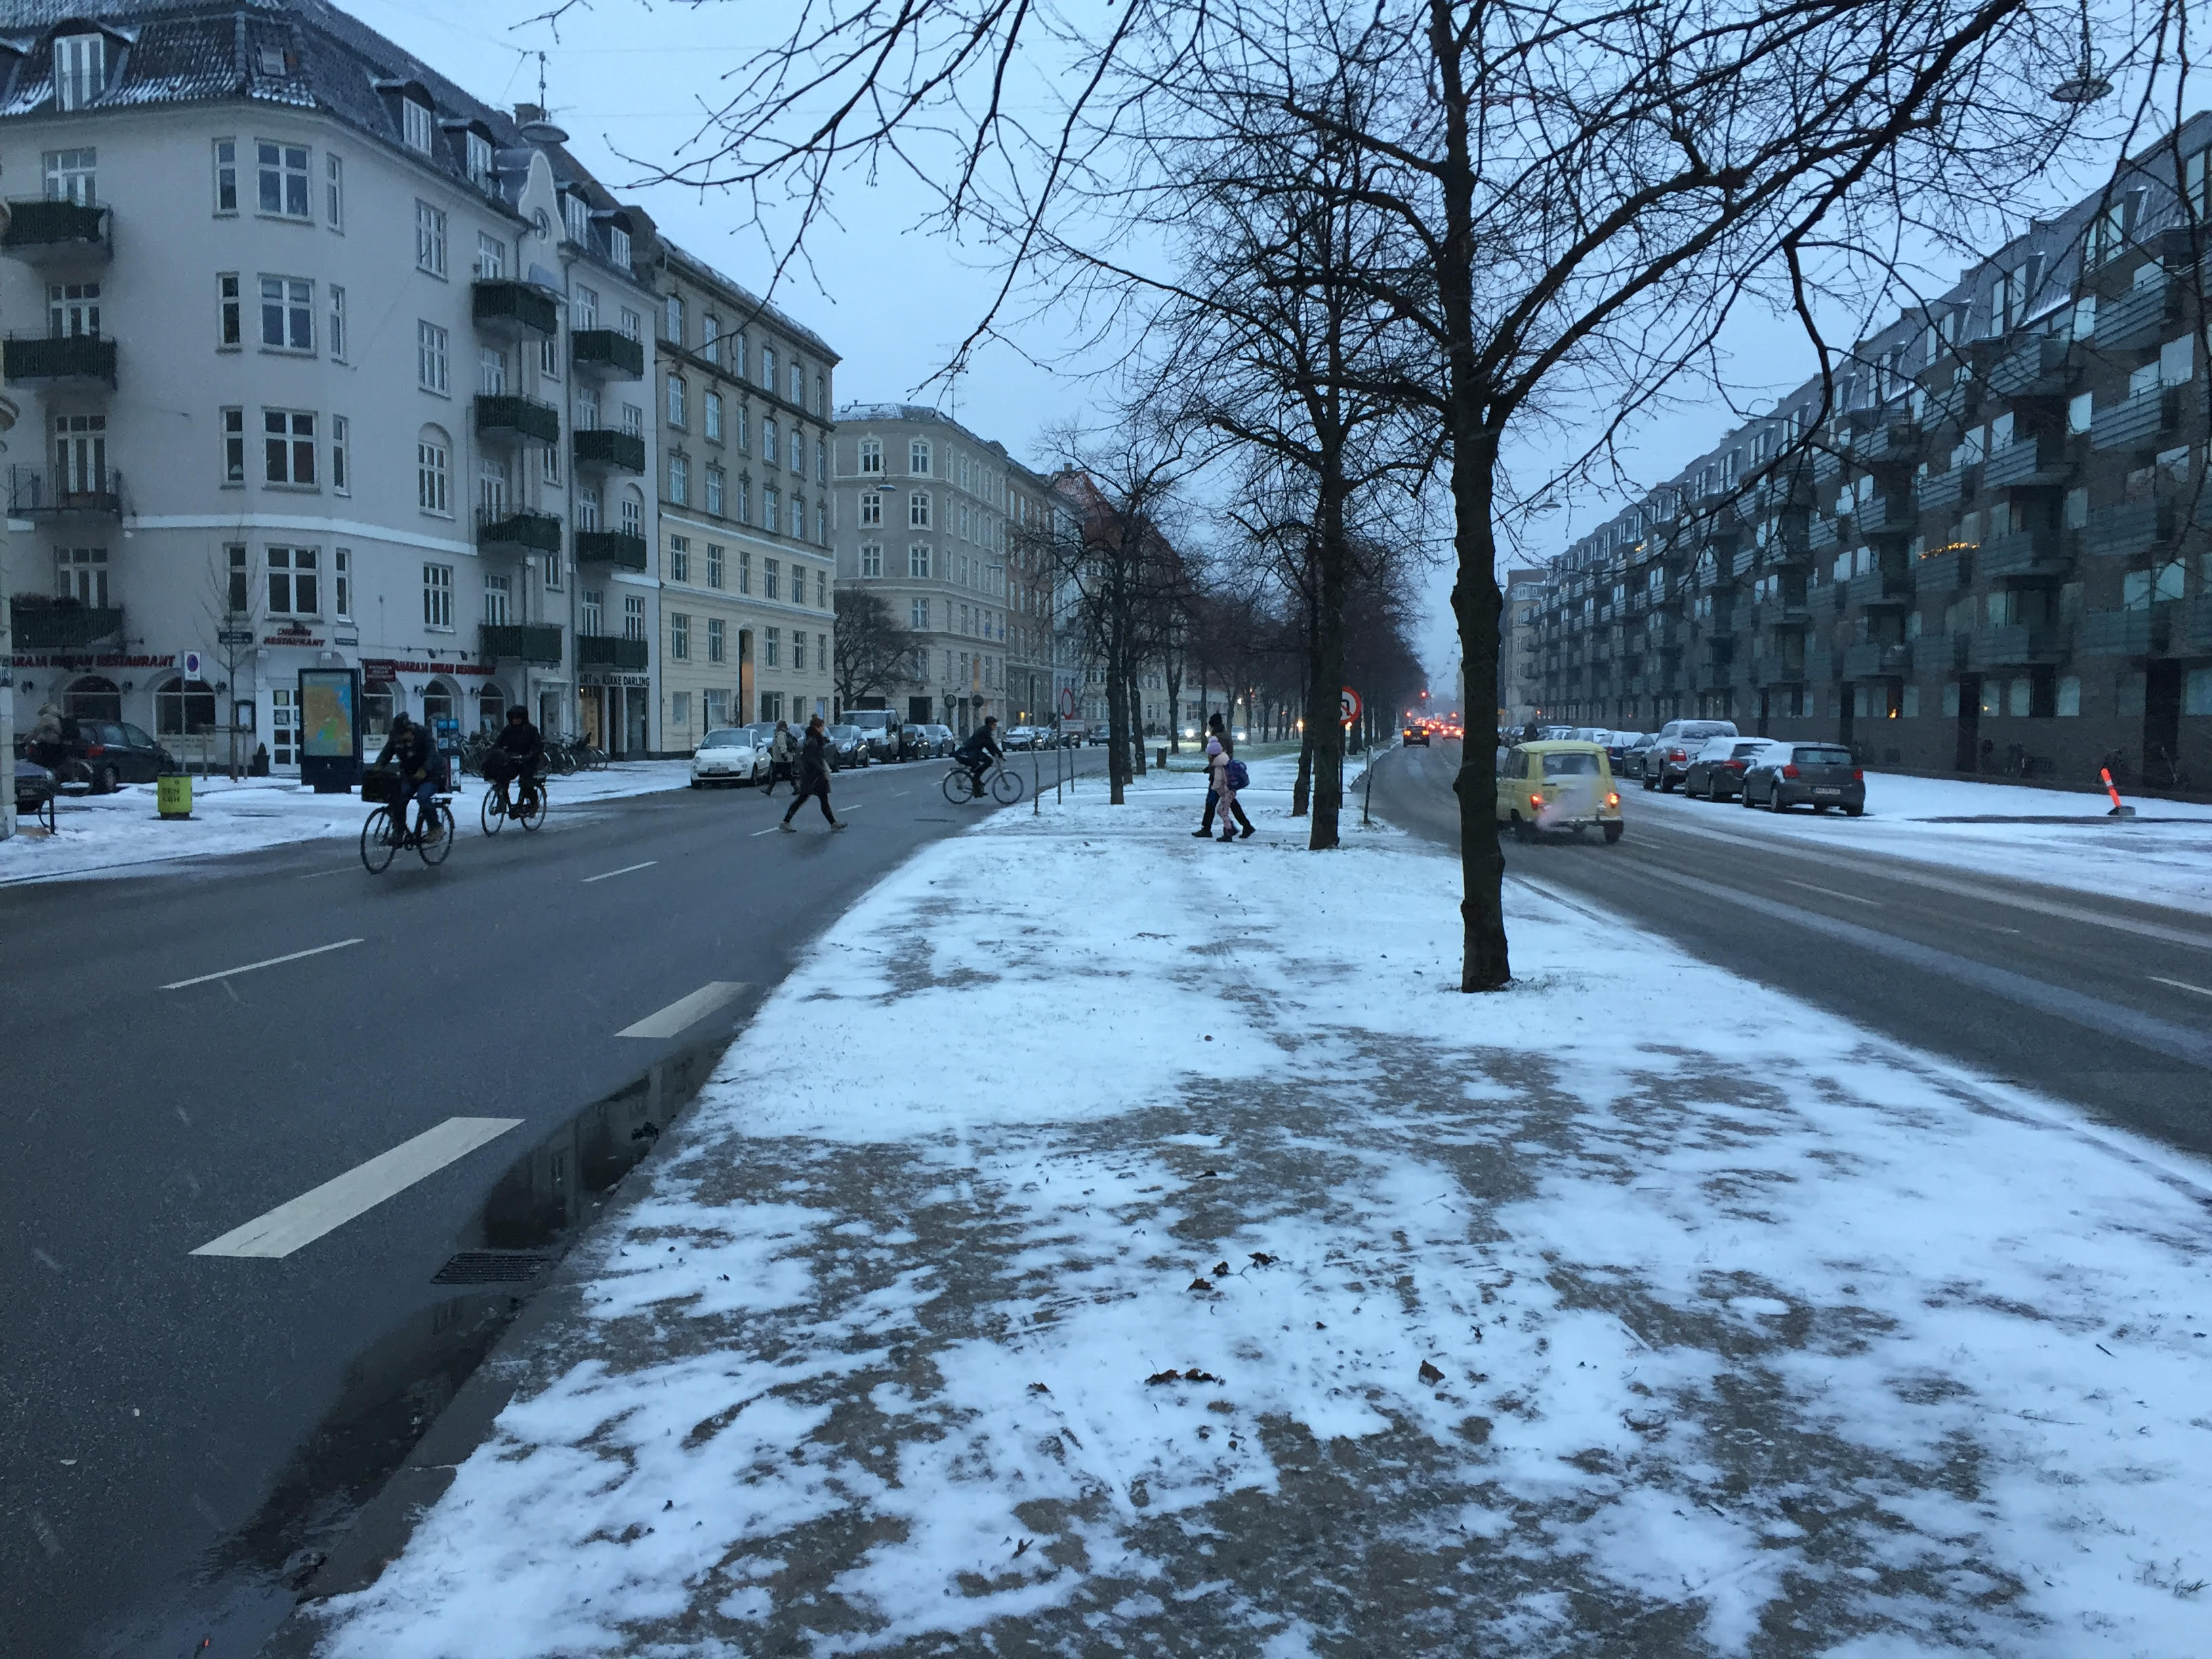 Snow brings slick roads to most of Denmark